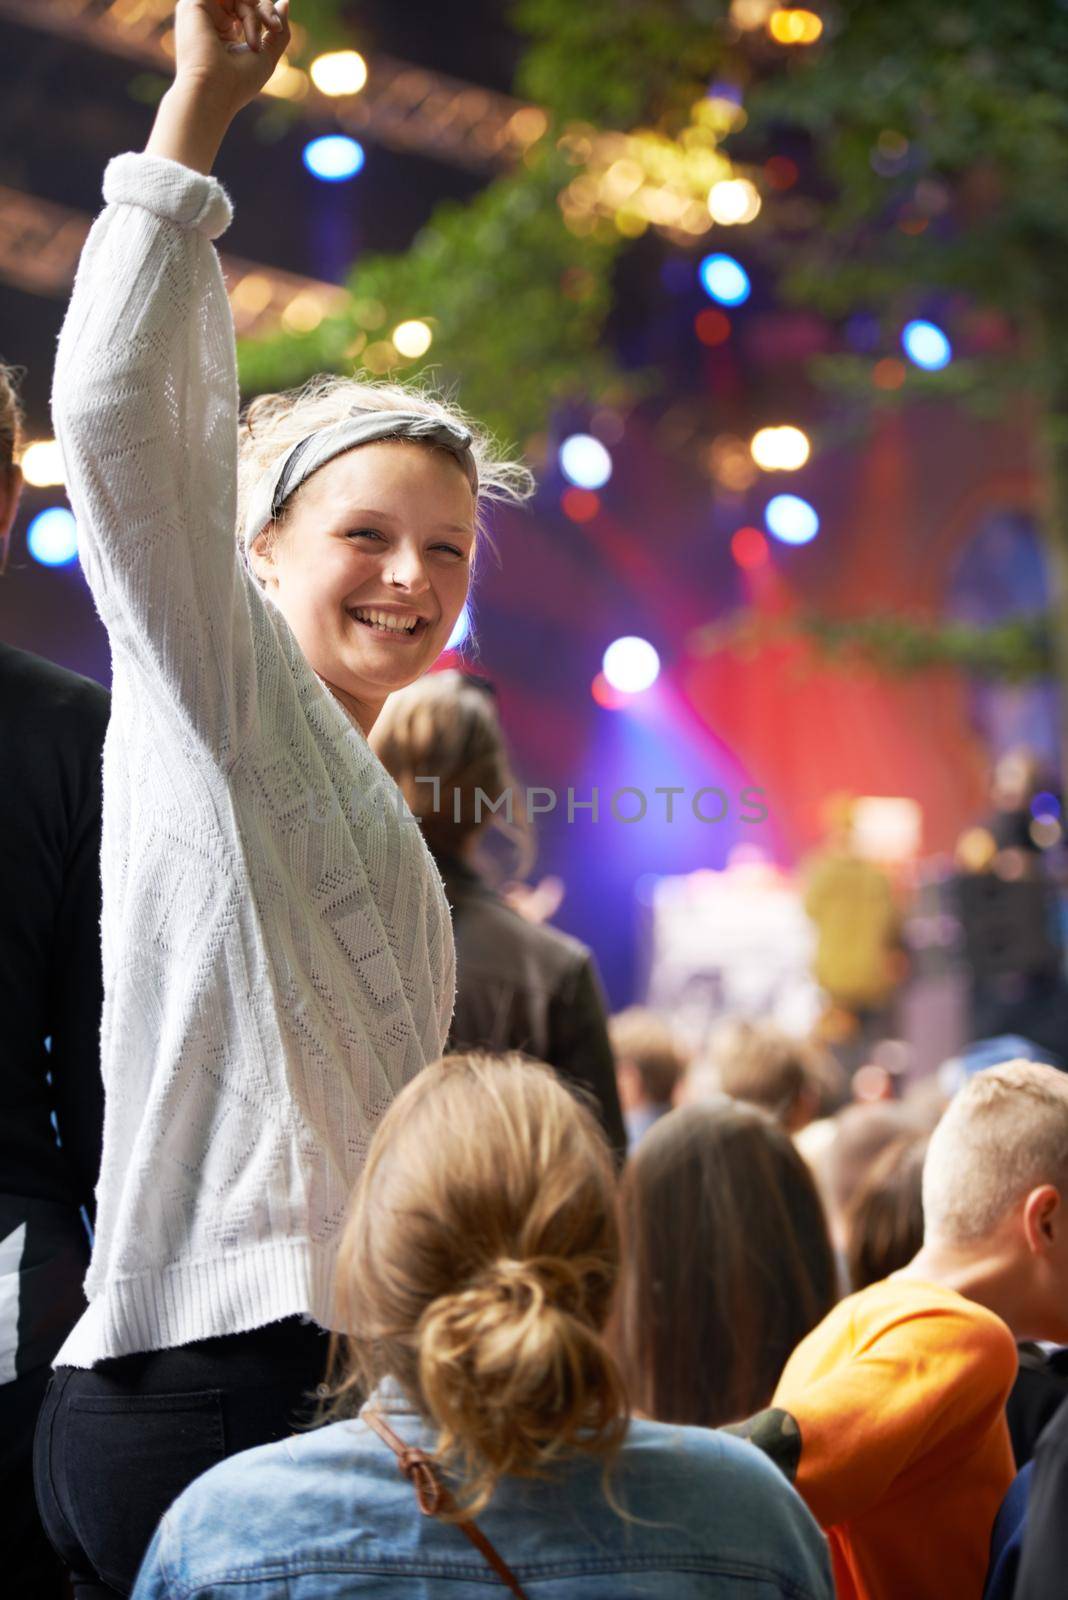 Excitement at the show. young people enjoying an outdoor music festival. by YuriArcurs